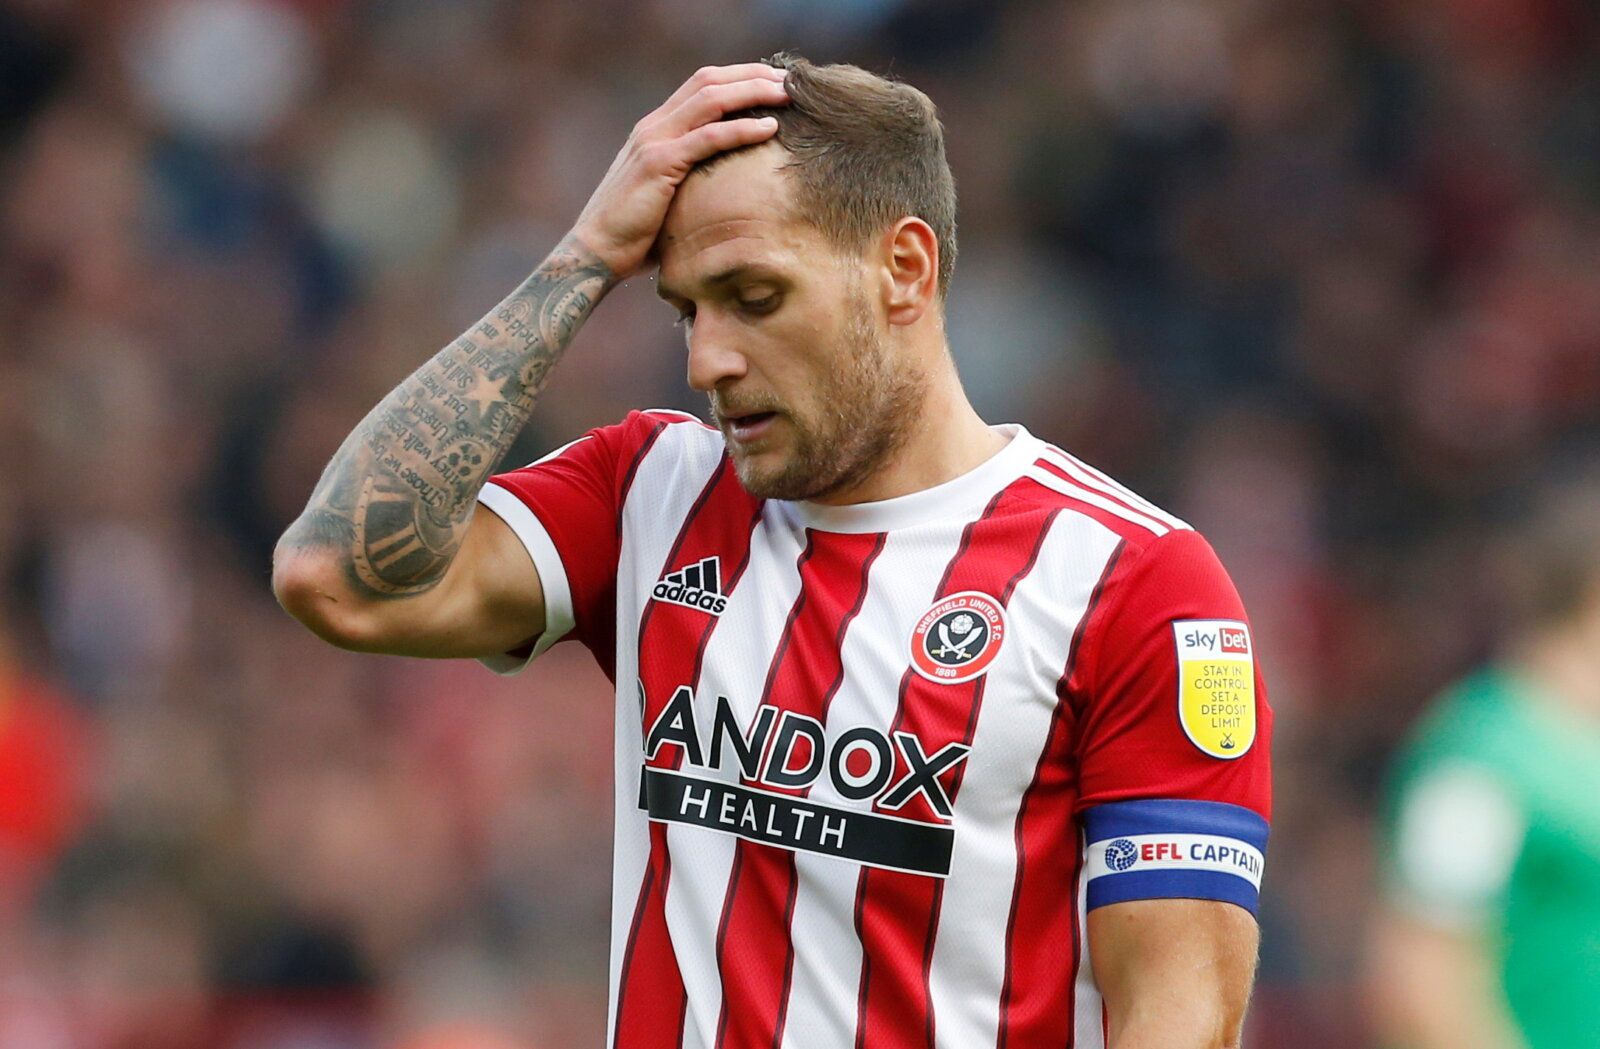 Soccer Football - Championship - Sheffield United v Stoke City - Bramall Lane, Sheffield, Britain - October 16, 2021 Sheffield United's Billy Sharp  Action Images/Craig Brough  EDITORIAL USE ONLY. No use with unauthorized audio, video, data, fixture lists, club/league logos or 